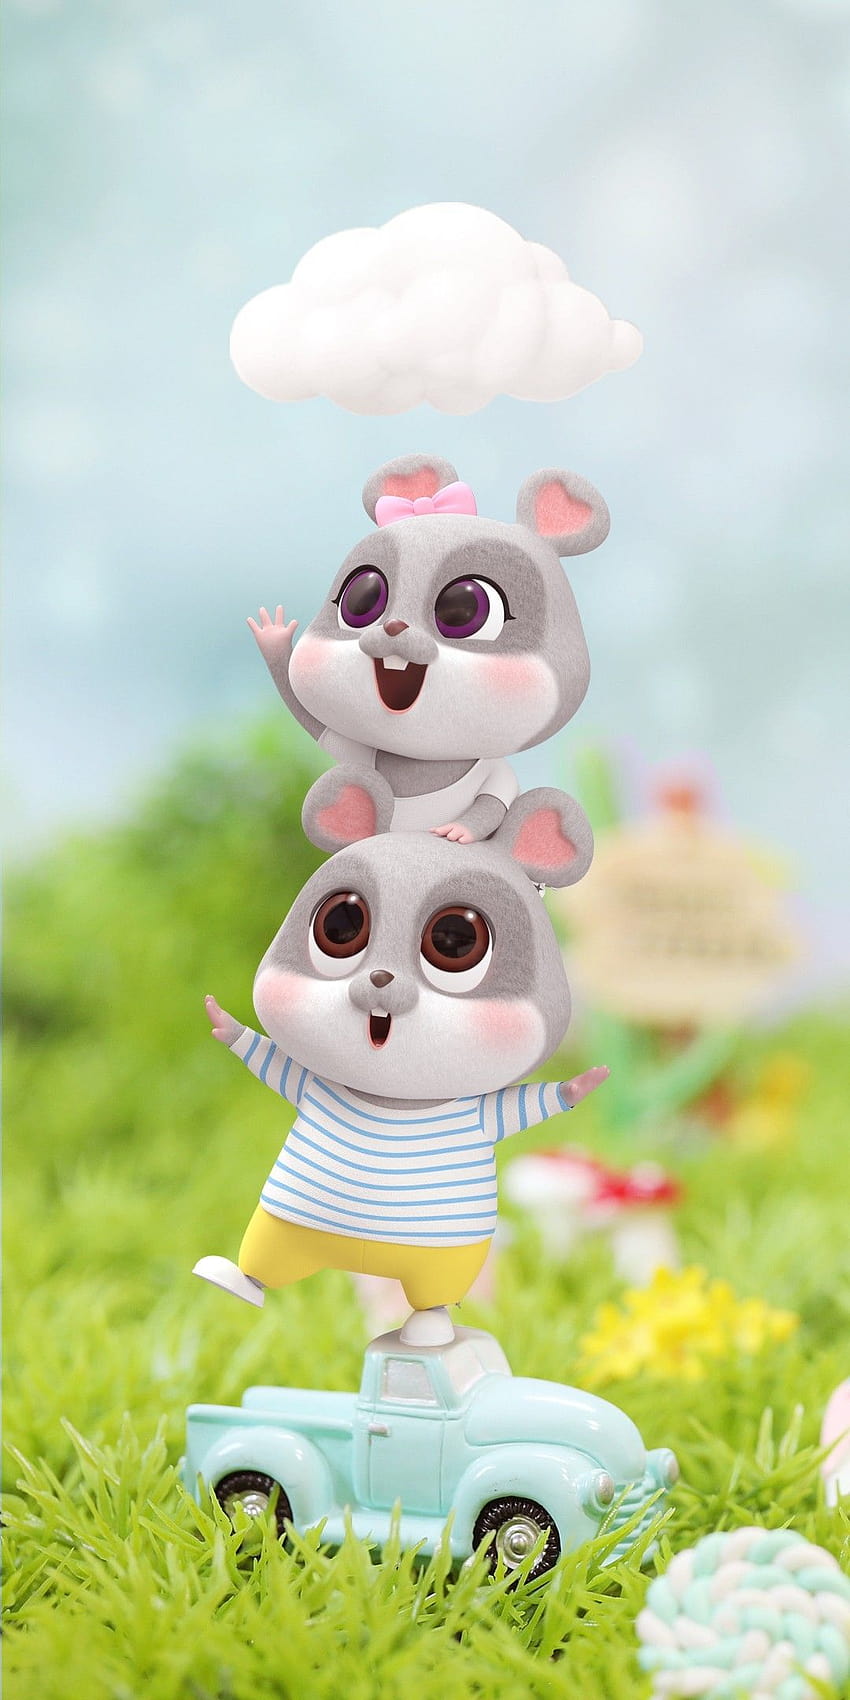 Whether you\'re an animal lover or simply looking for a cute and charming wallpaper for your phone, our collection of HD cartoon animal wallpapers has you covered. From mice to rabbits, these wallpapers are sure to bring a smile to your face.